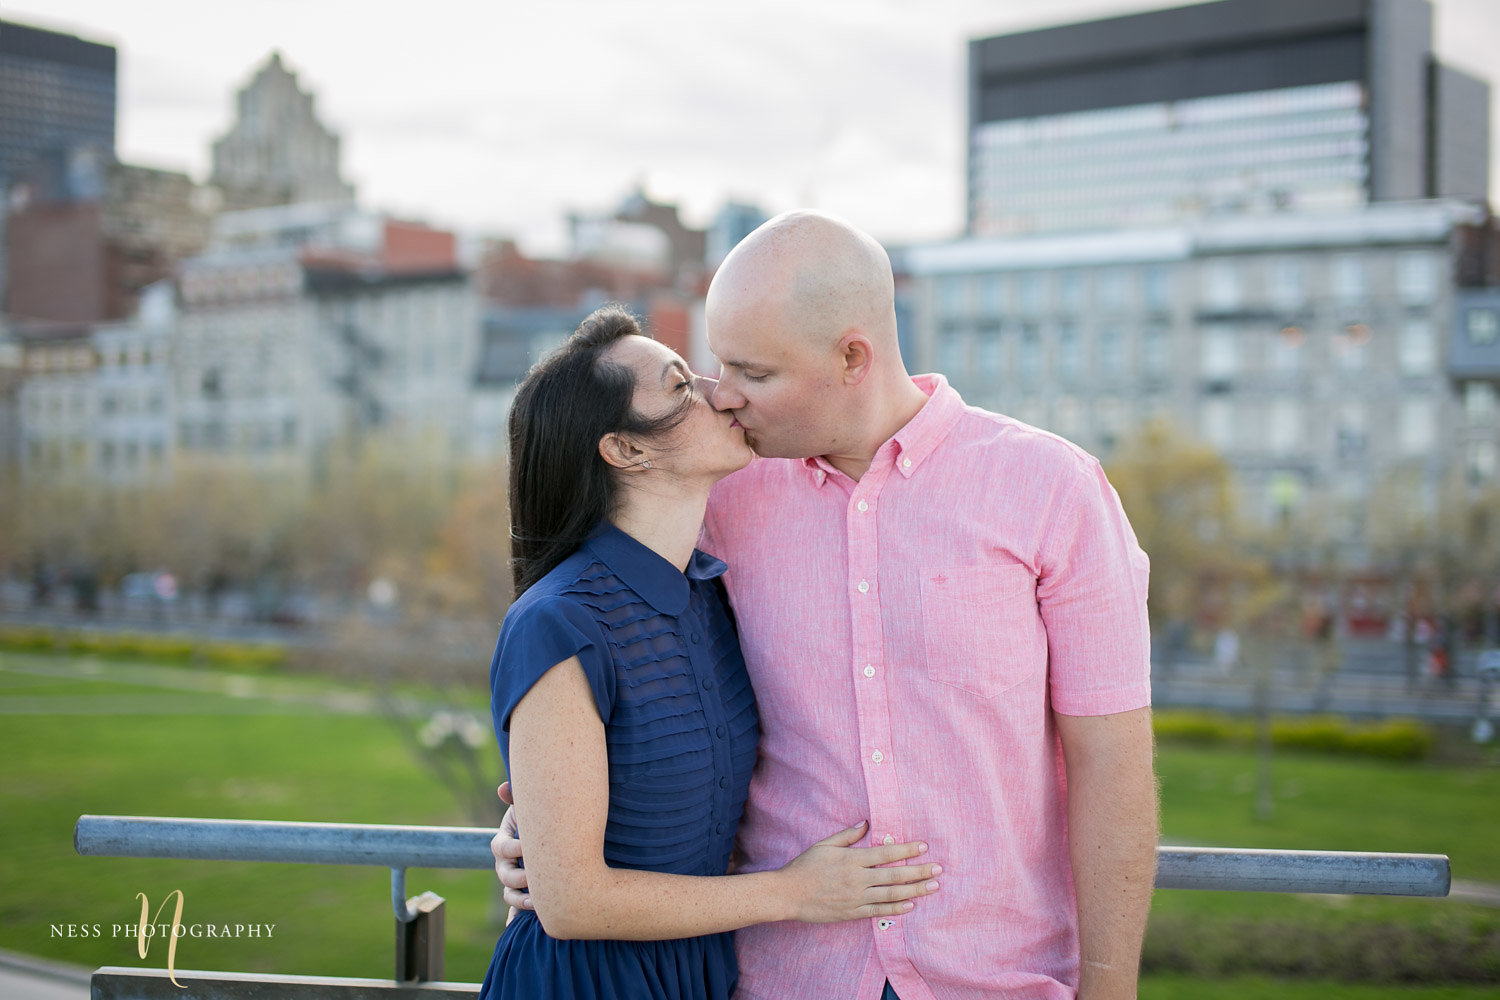 Adelina & Dan Engagement Photos Old Port Montreal with white dog By Ness Photography Wedding and Engagement Photographer 132.jpg